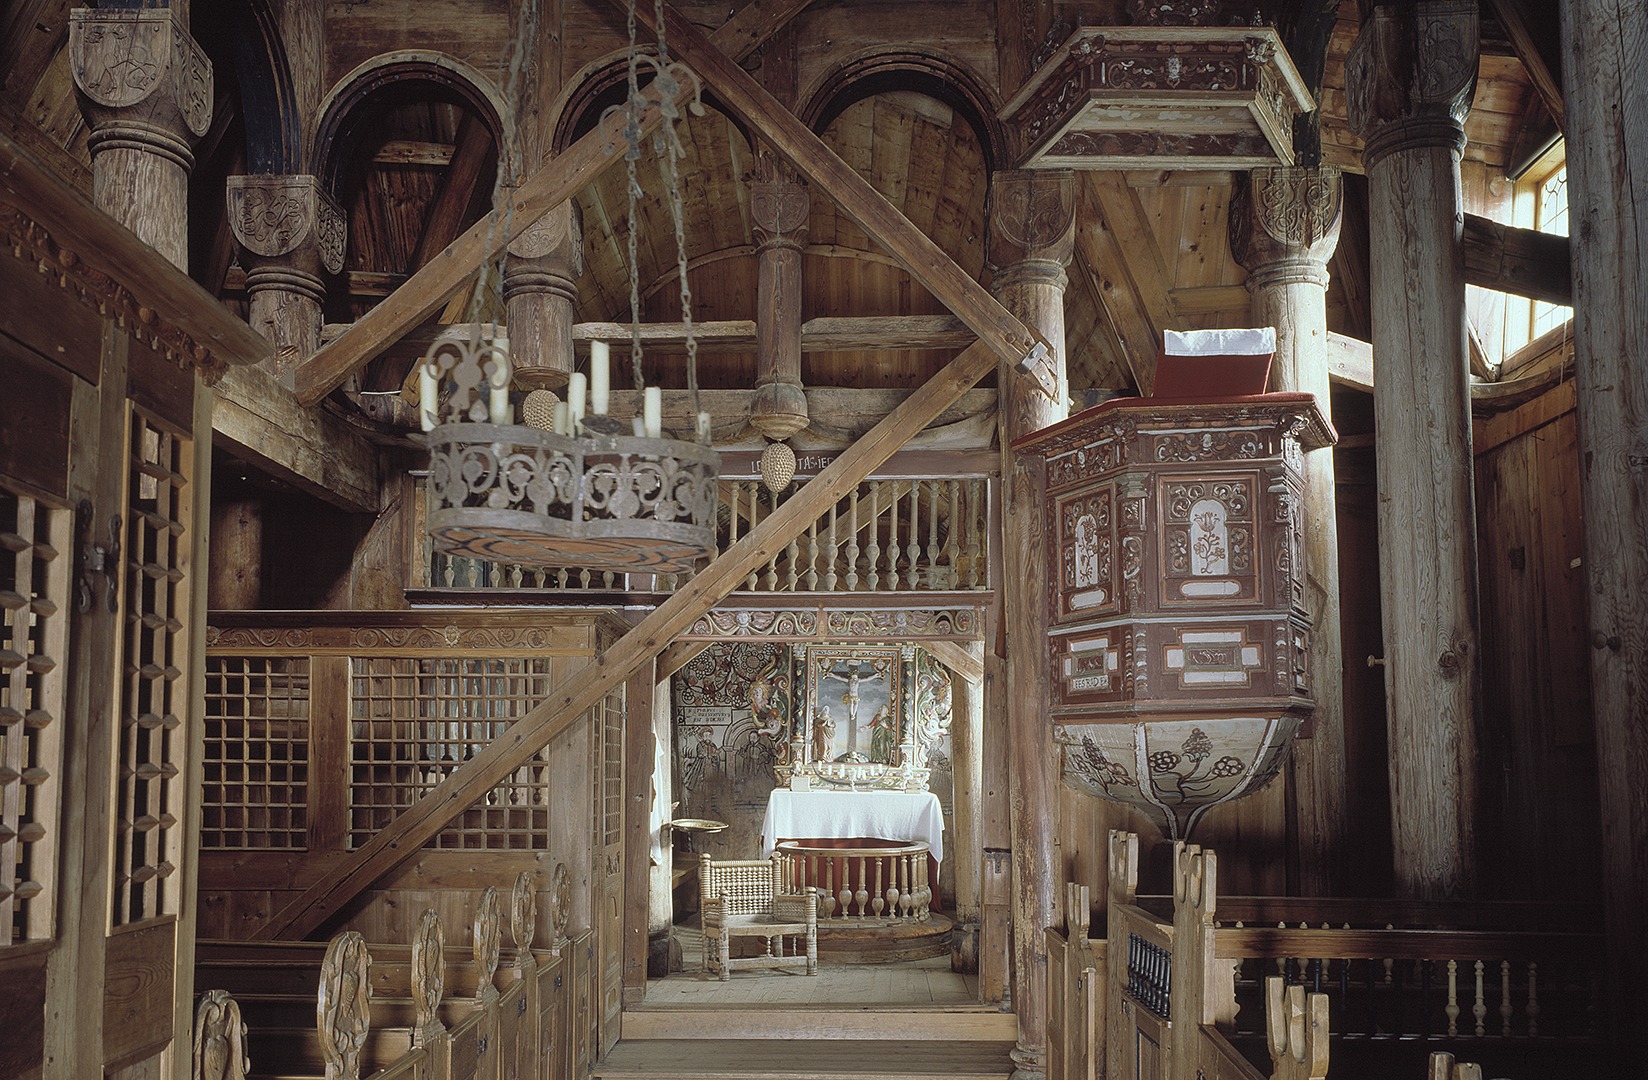 Picture of the interior of Urnes Stave Church. Photo by Jiri Havran, the Directorate for Cultural Heritage